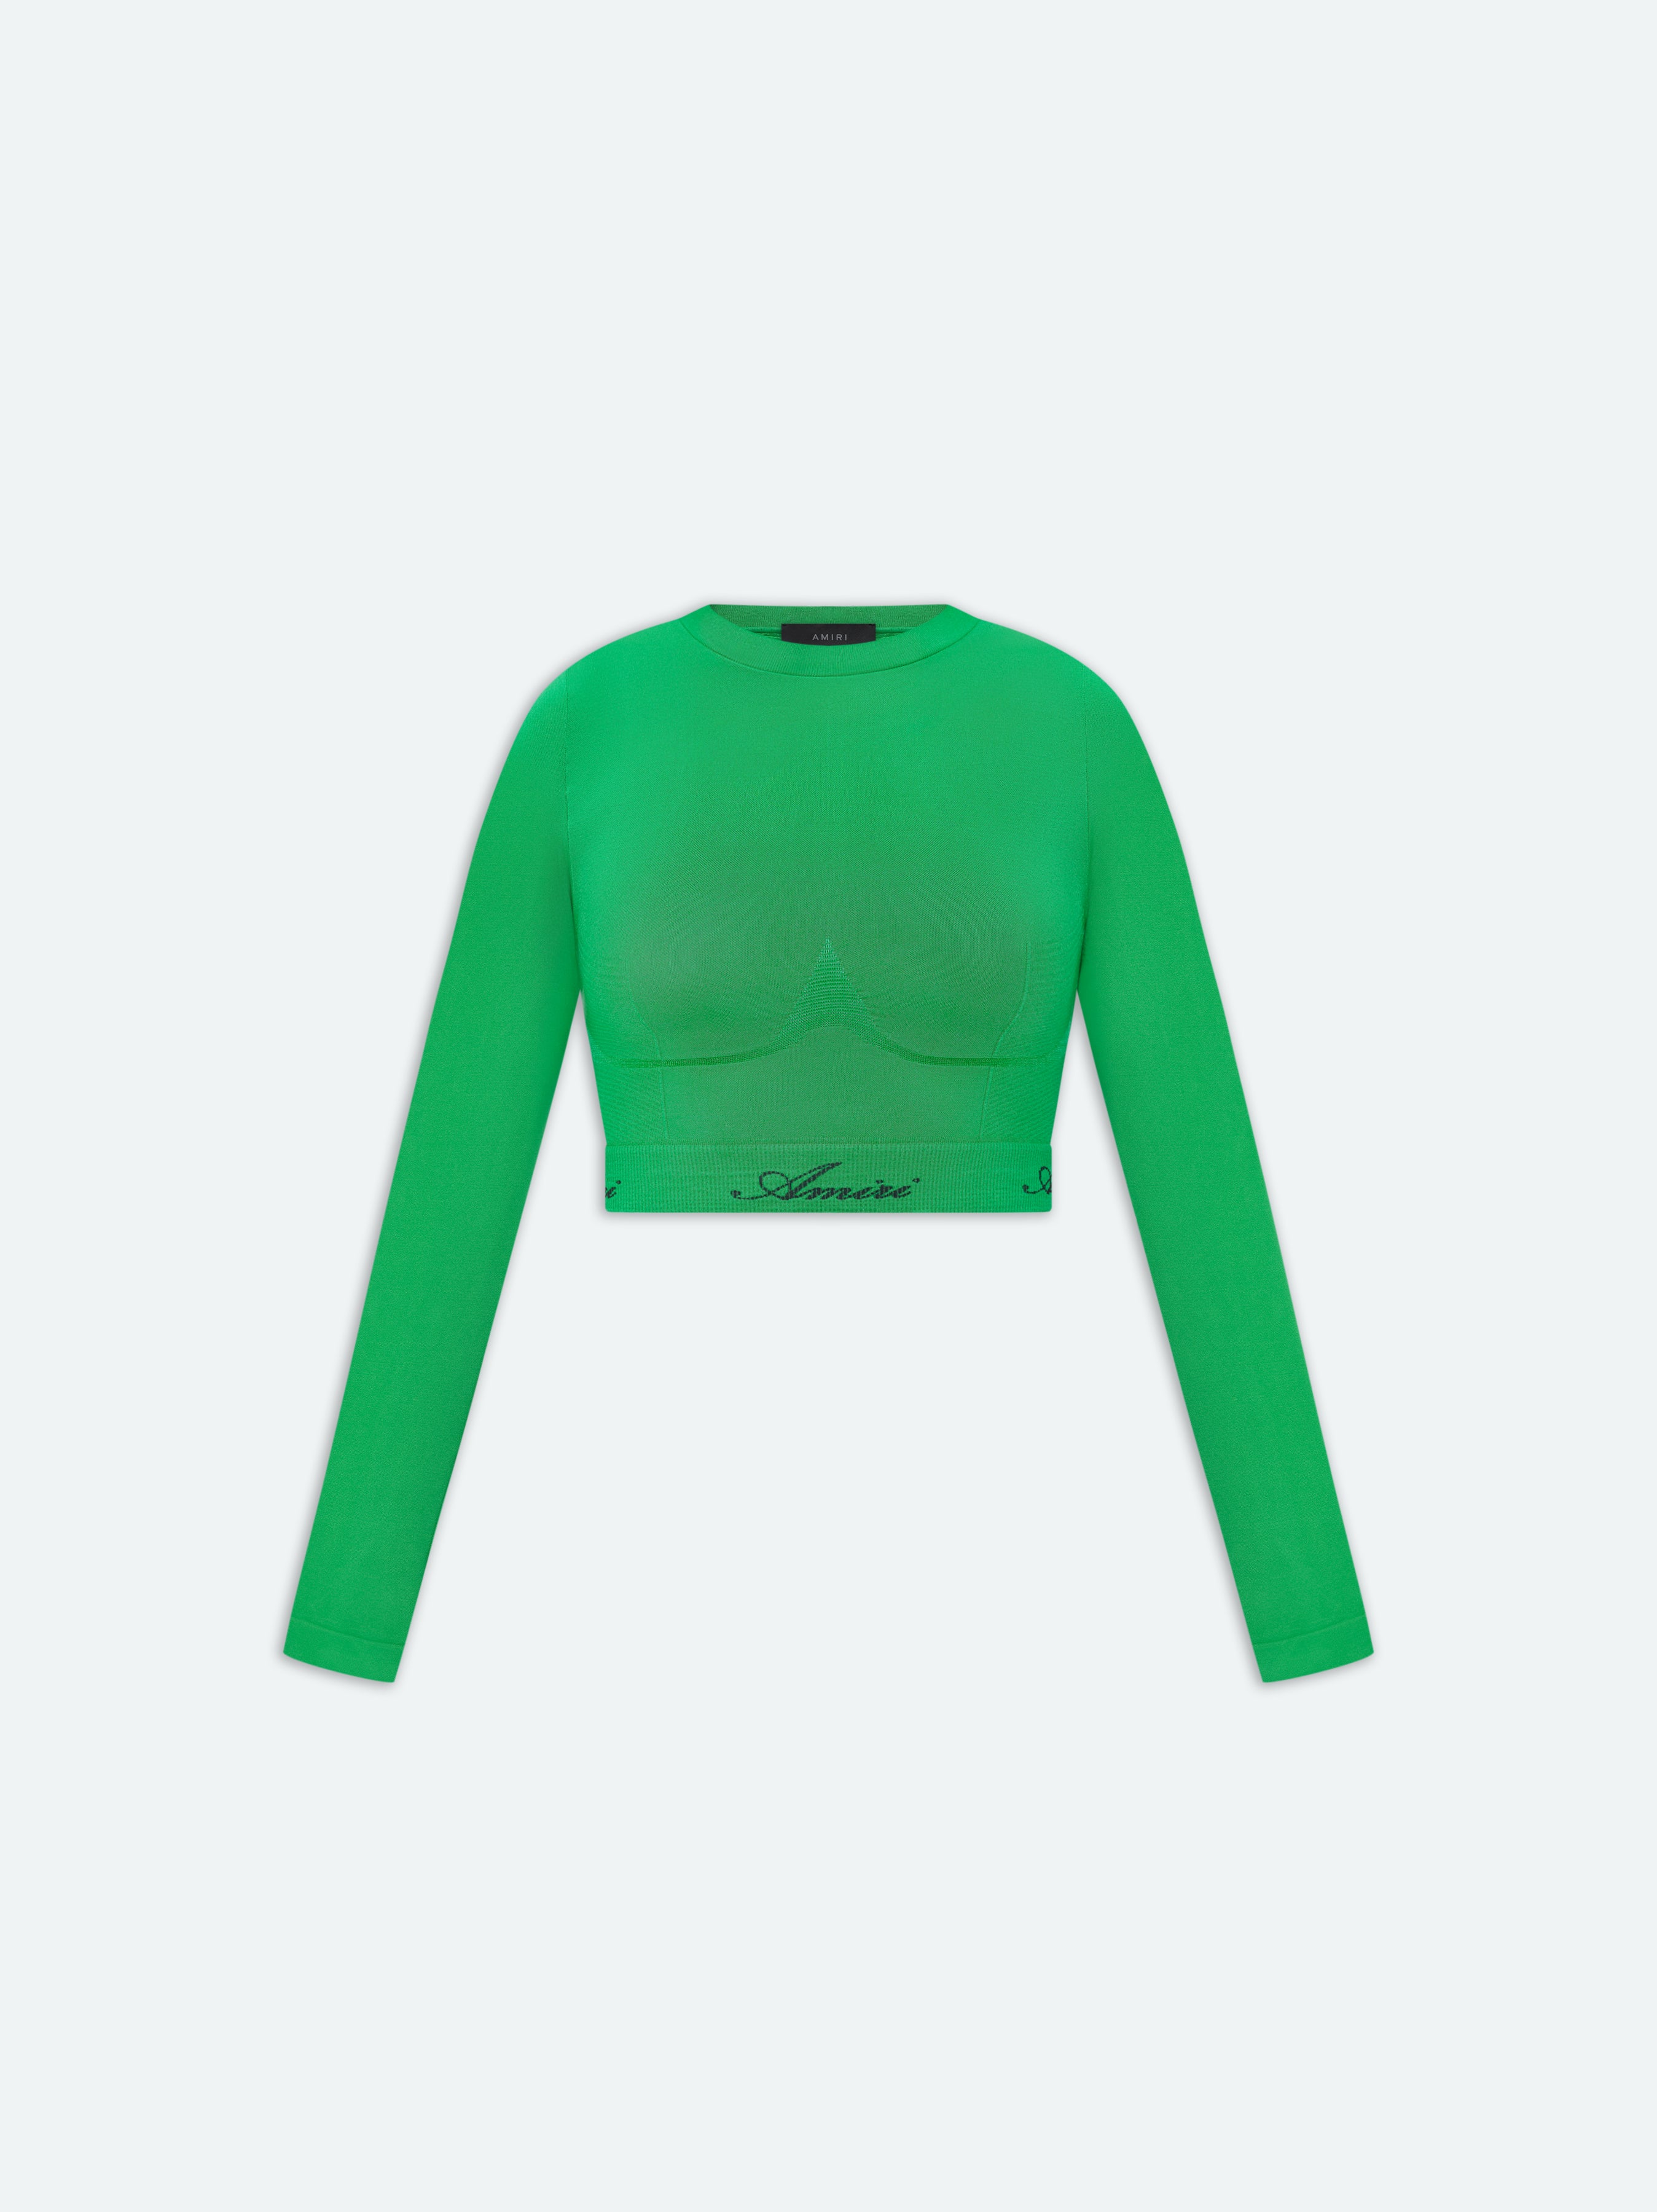 Product WOMEN - SEAMLESS L/S MOCK NECK TOP - Fern Green featured image